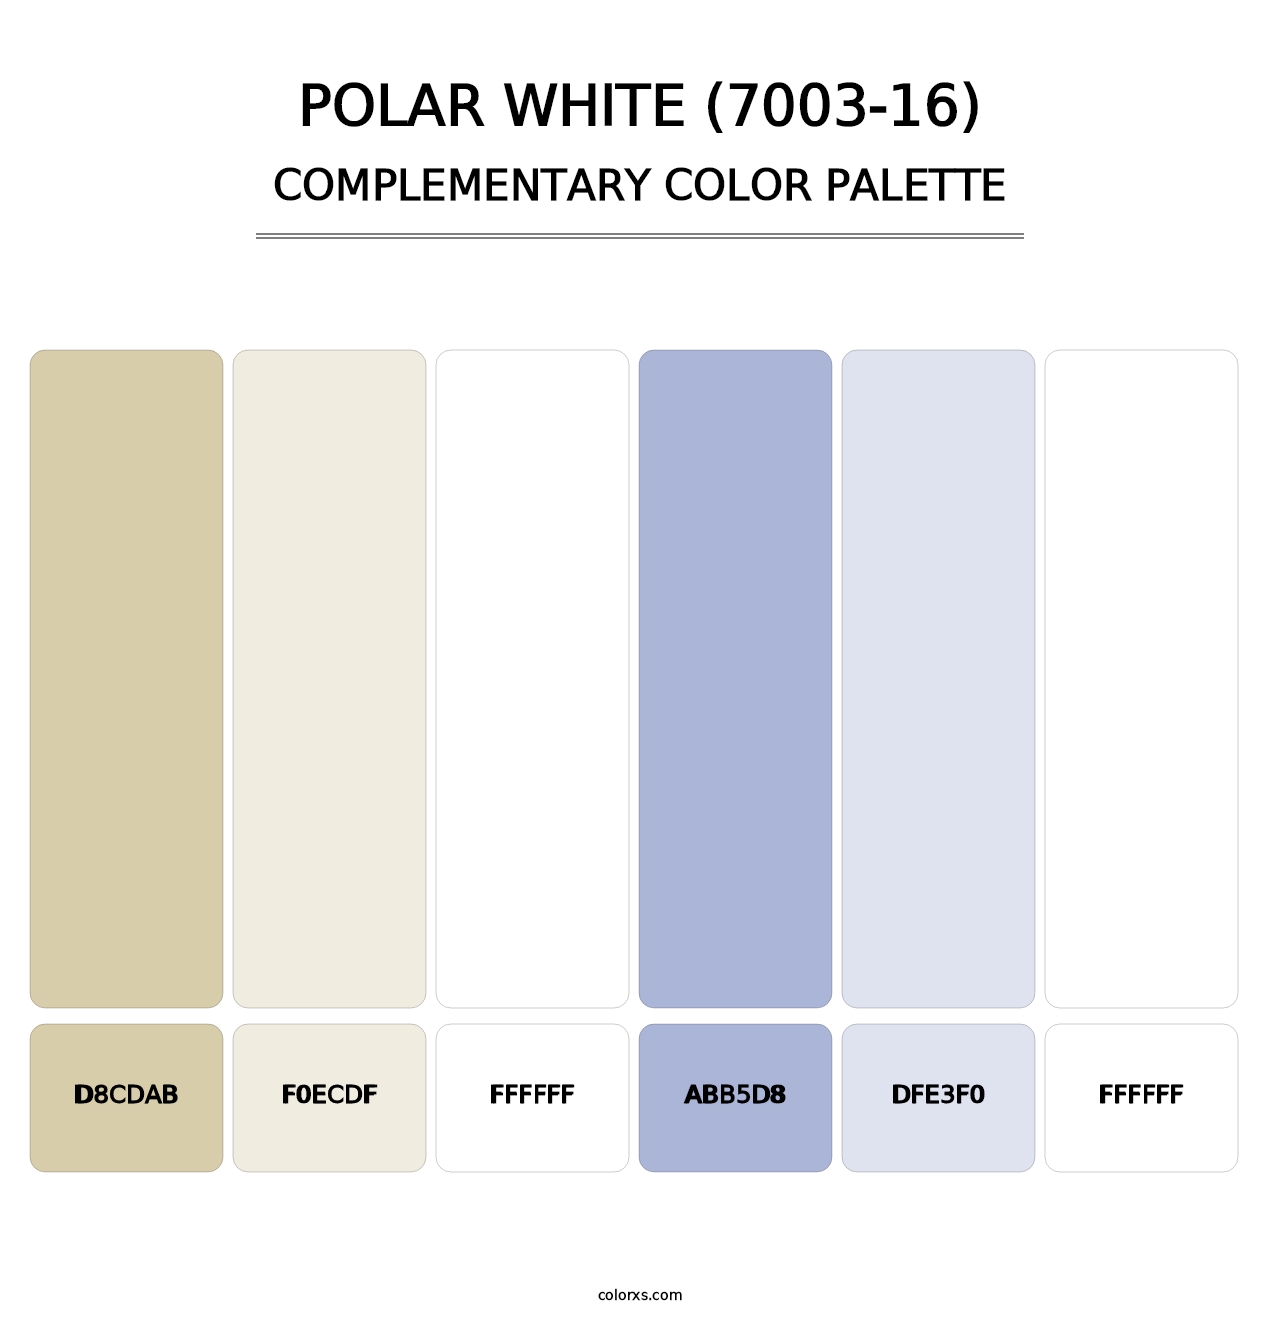 Polar White (7003-16) - Complementary Color Palette